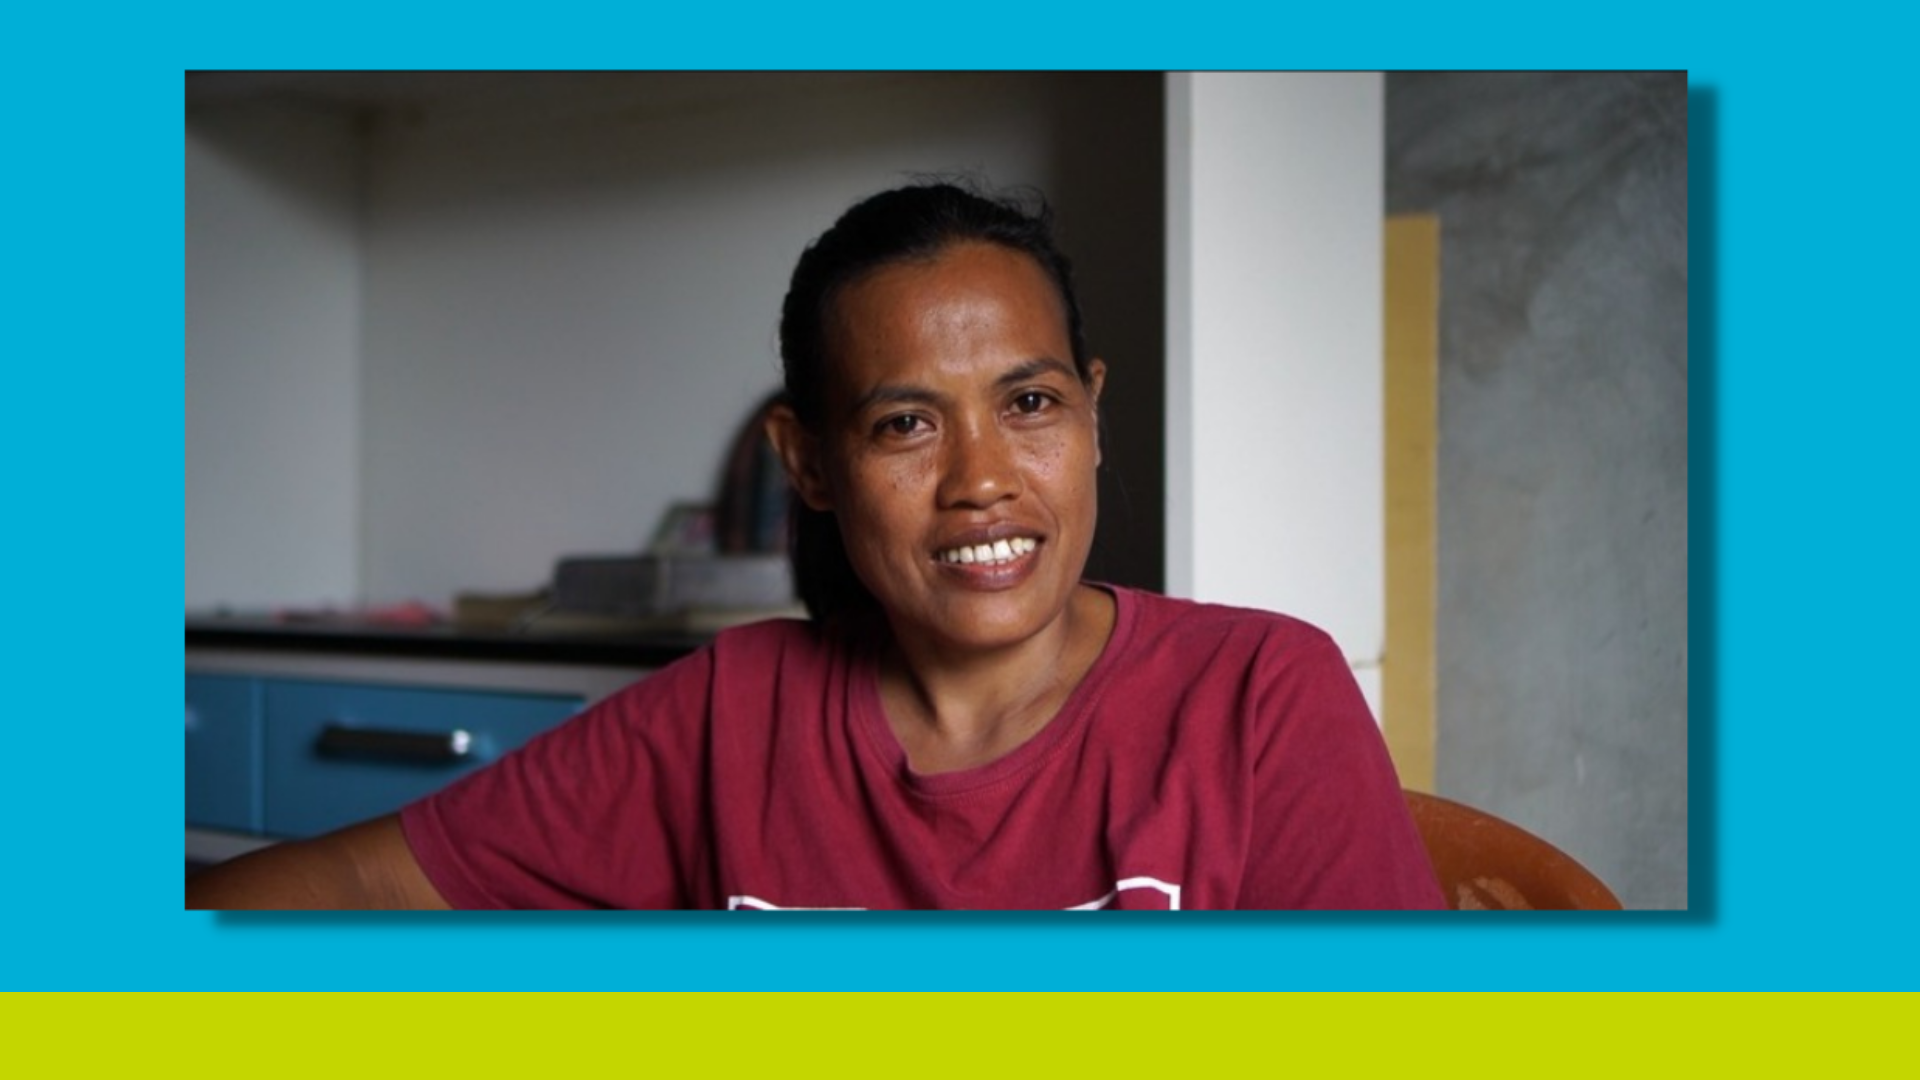 The dream of owning a home came true thanks to the financial training provided by Habitat Indonesia